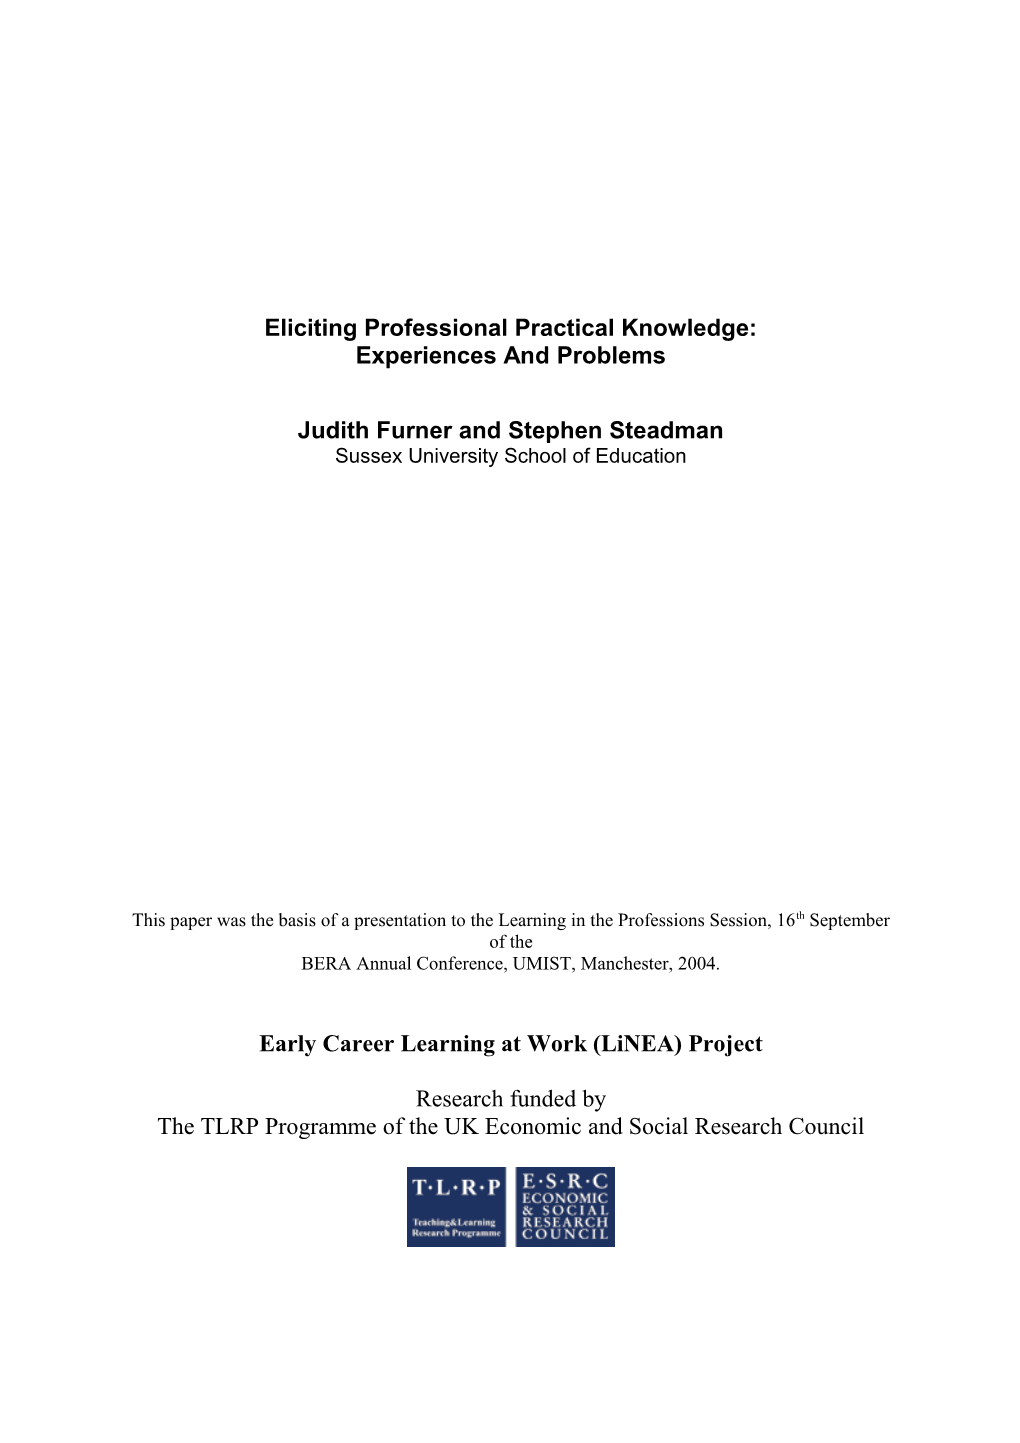 Eliciting Professional Practical Knowledge Experiences and Problems